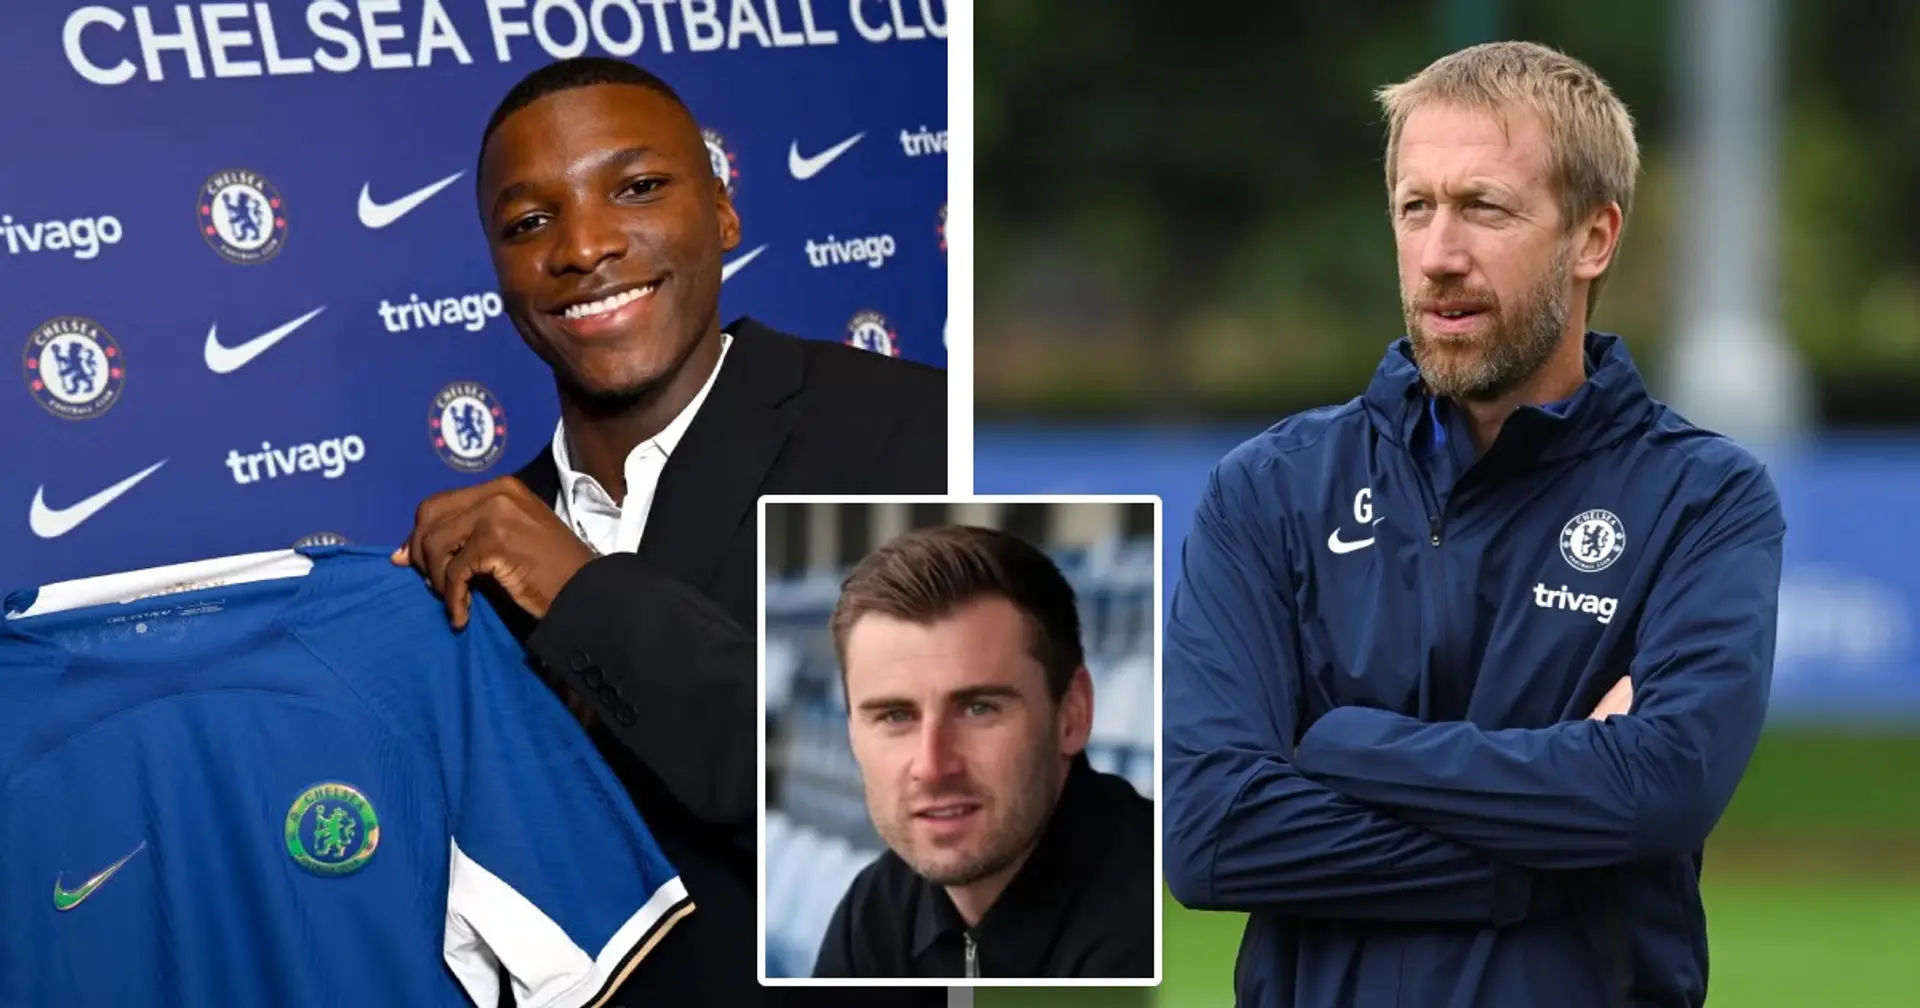 Sam Jewell to become 11th staff member or player to join Chelsea from Brighton in 17 months